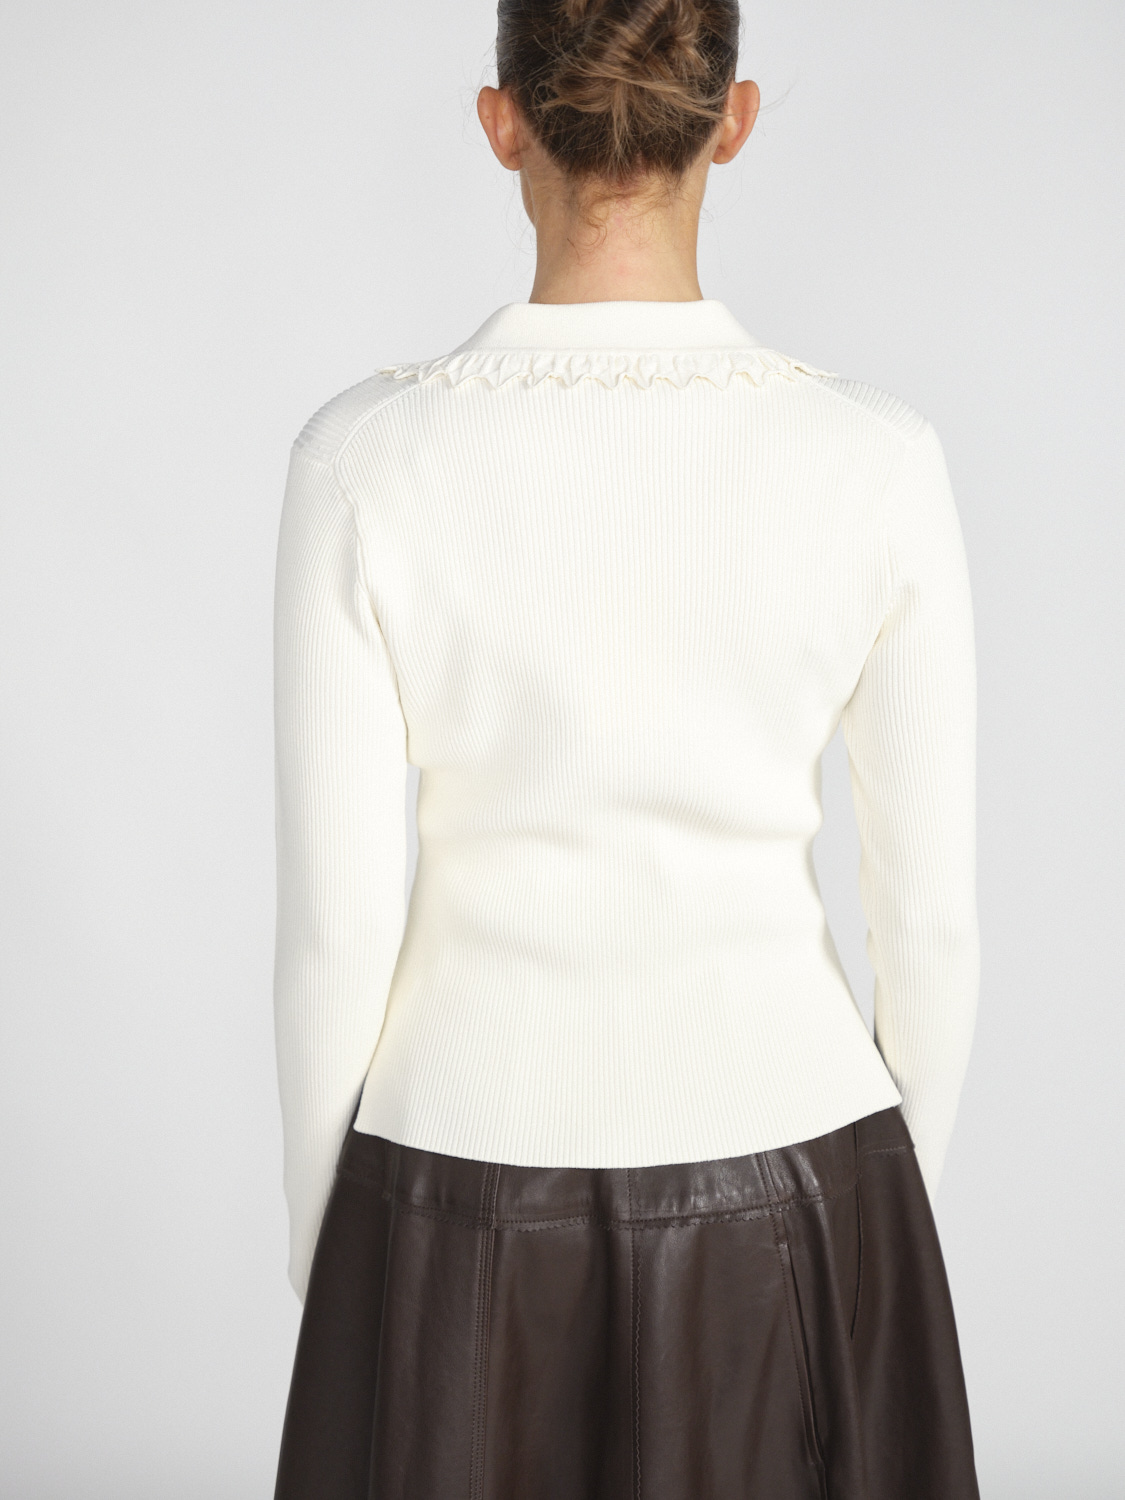 Ulla Johnson Liese - Longsleeve with frill details  creme S